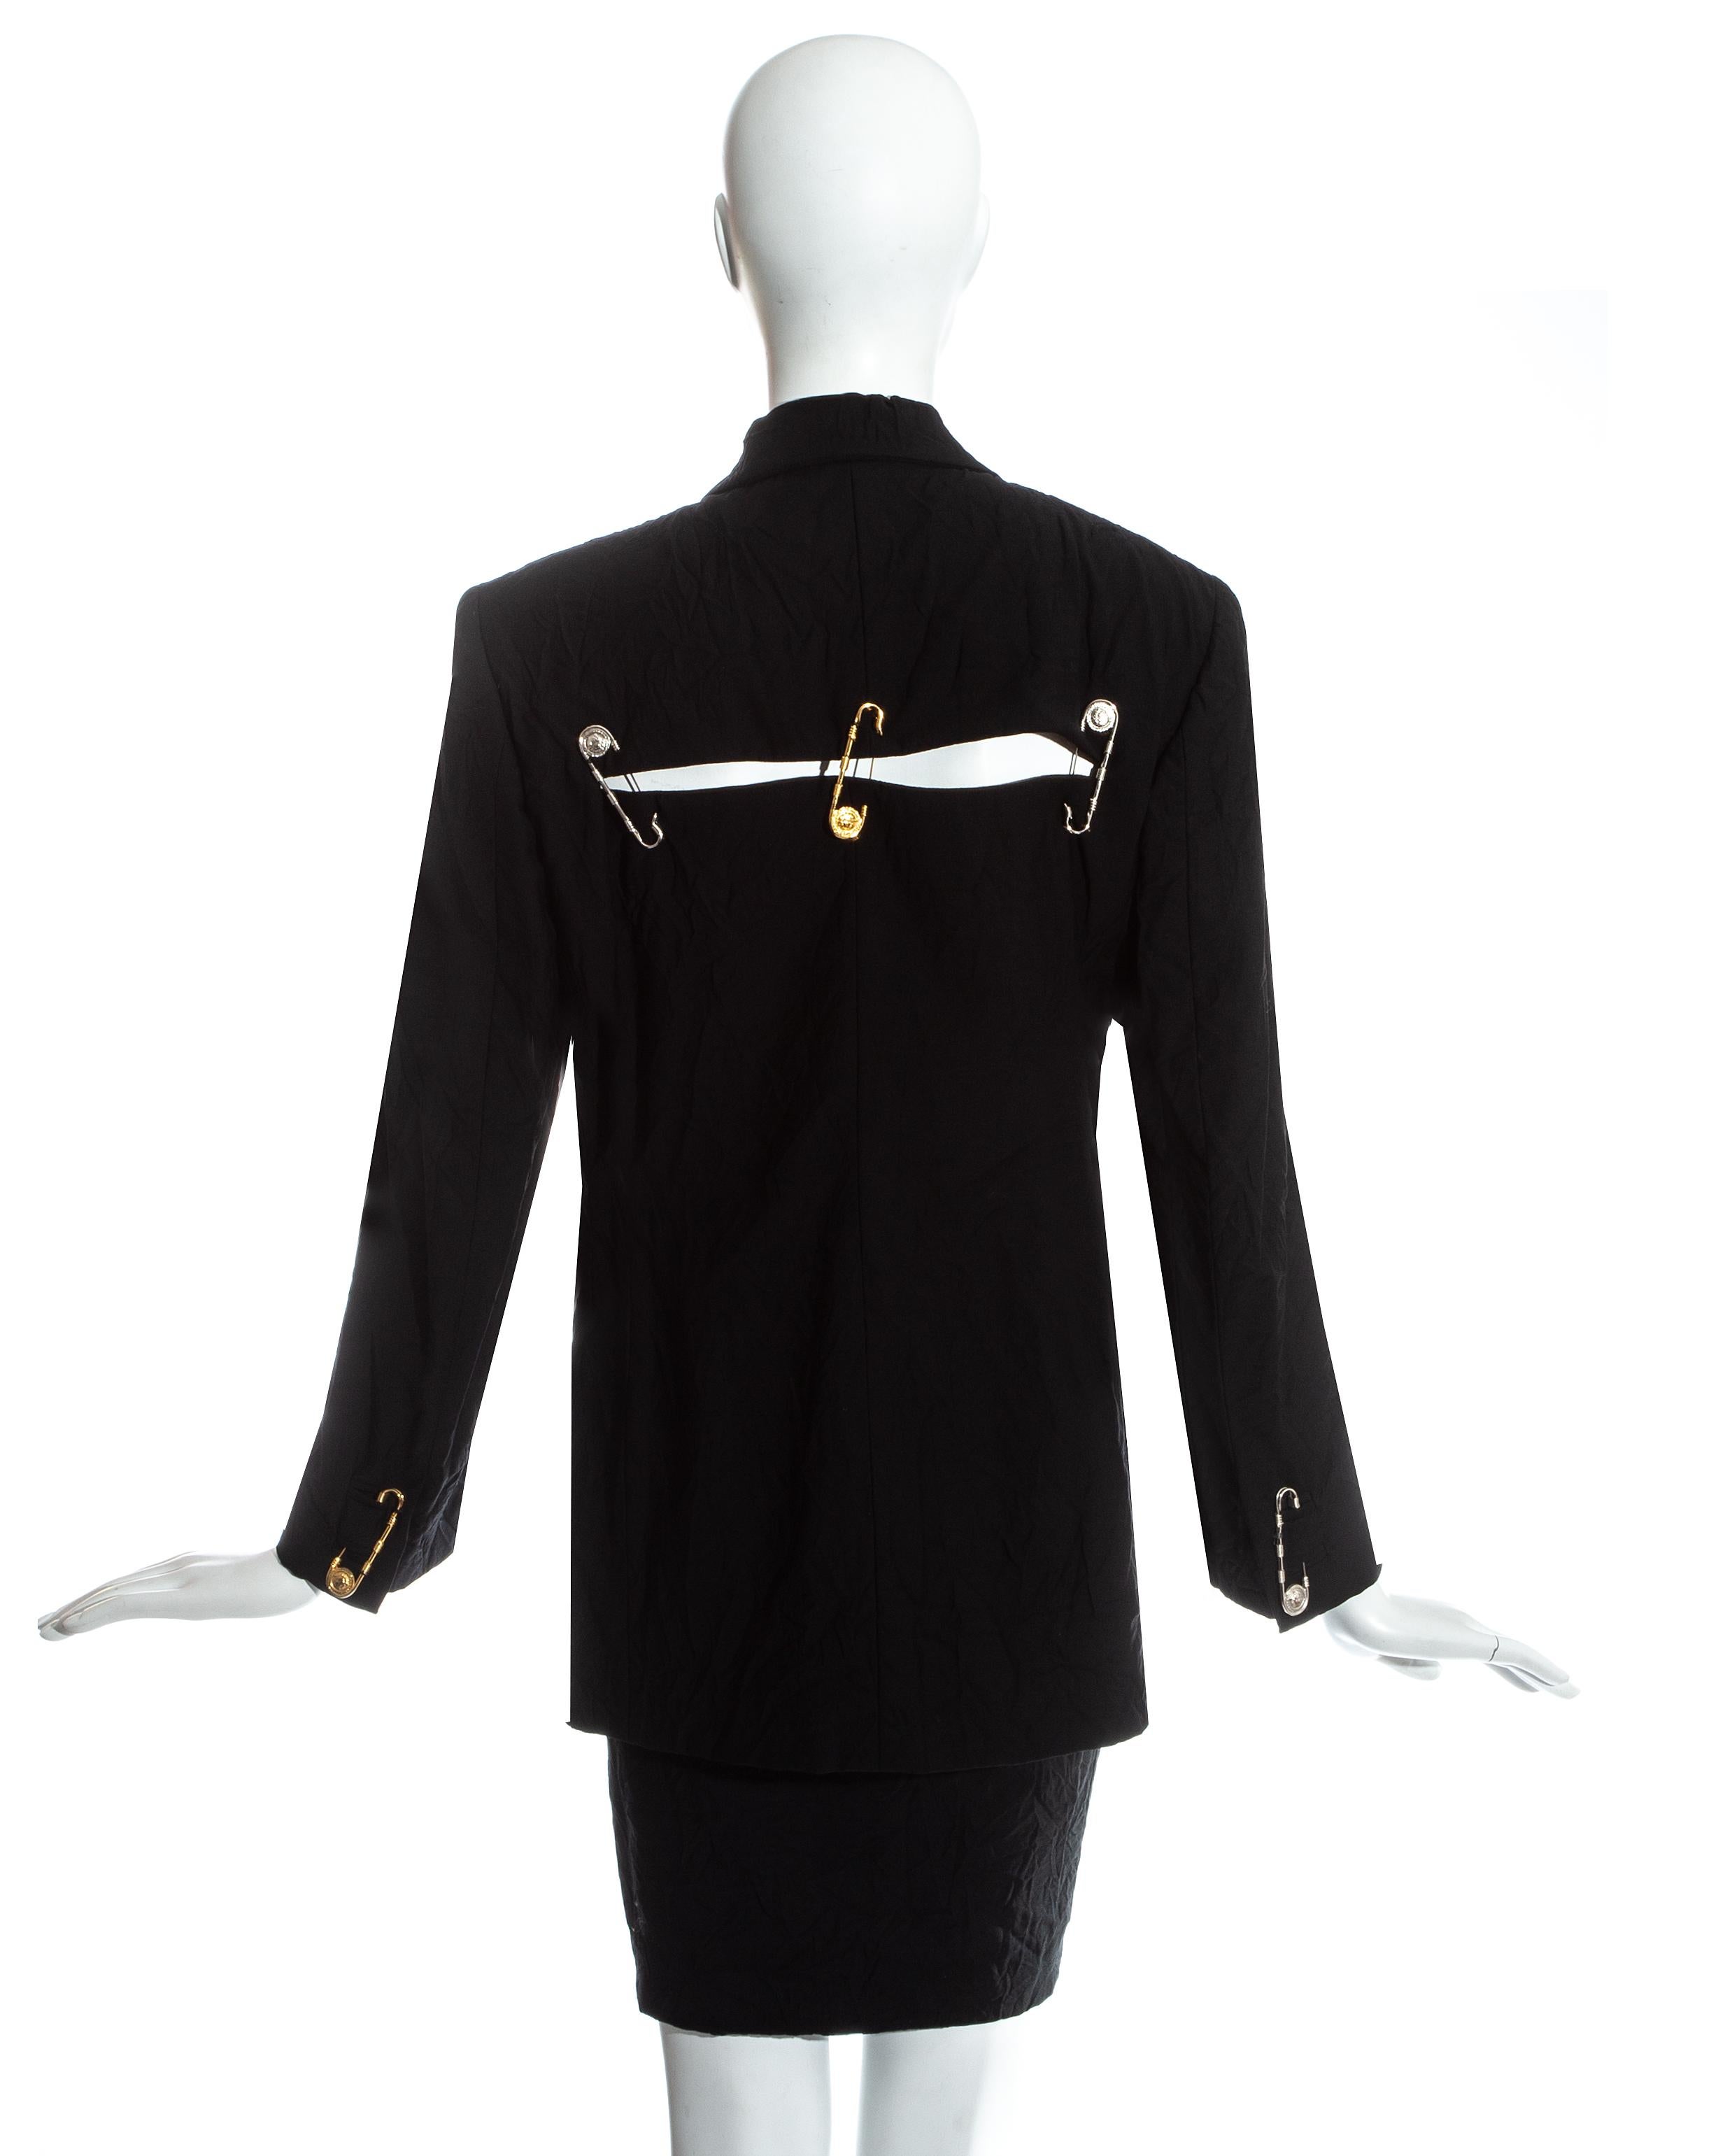 Gianni Versace black crinkled safety pin skirt suit, ss 1994 For Sale 4